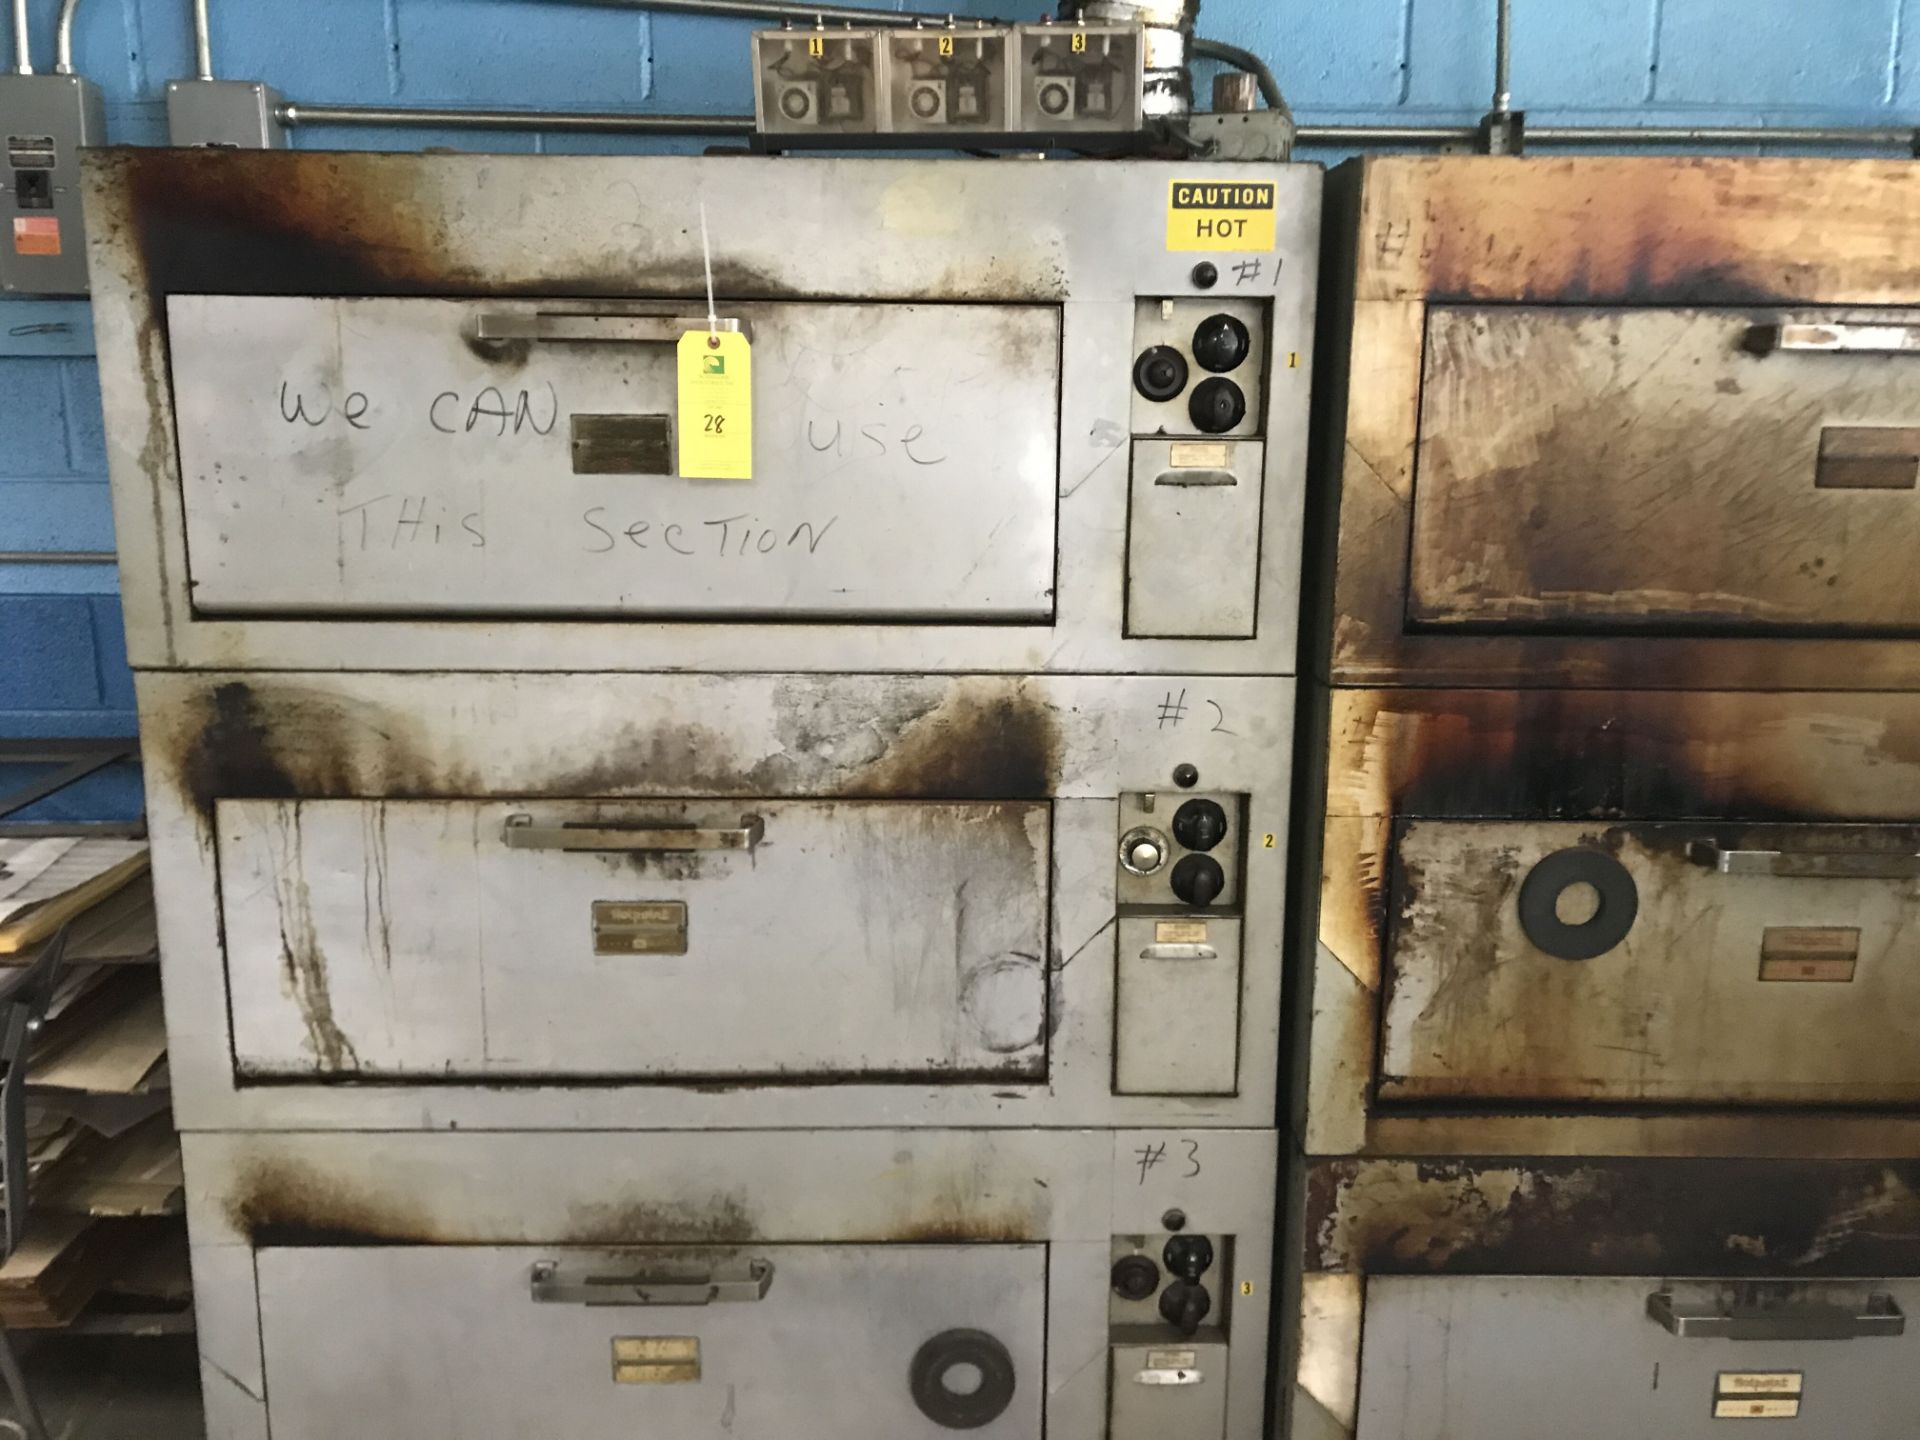 (6) Hotpoint Ovens, Used For Baking/Curing Voice Coils on Mandrels